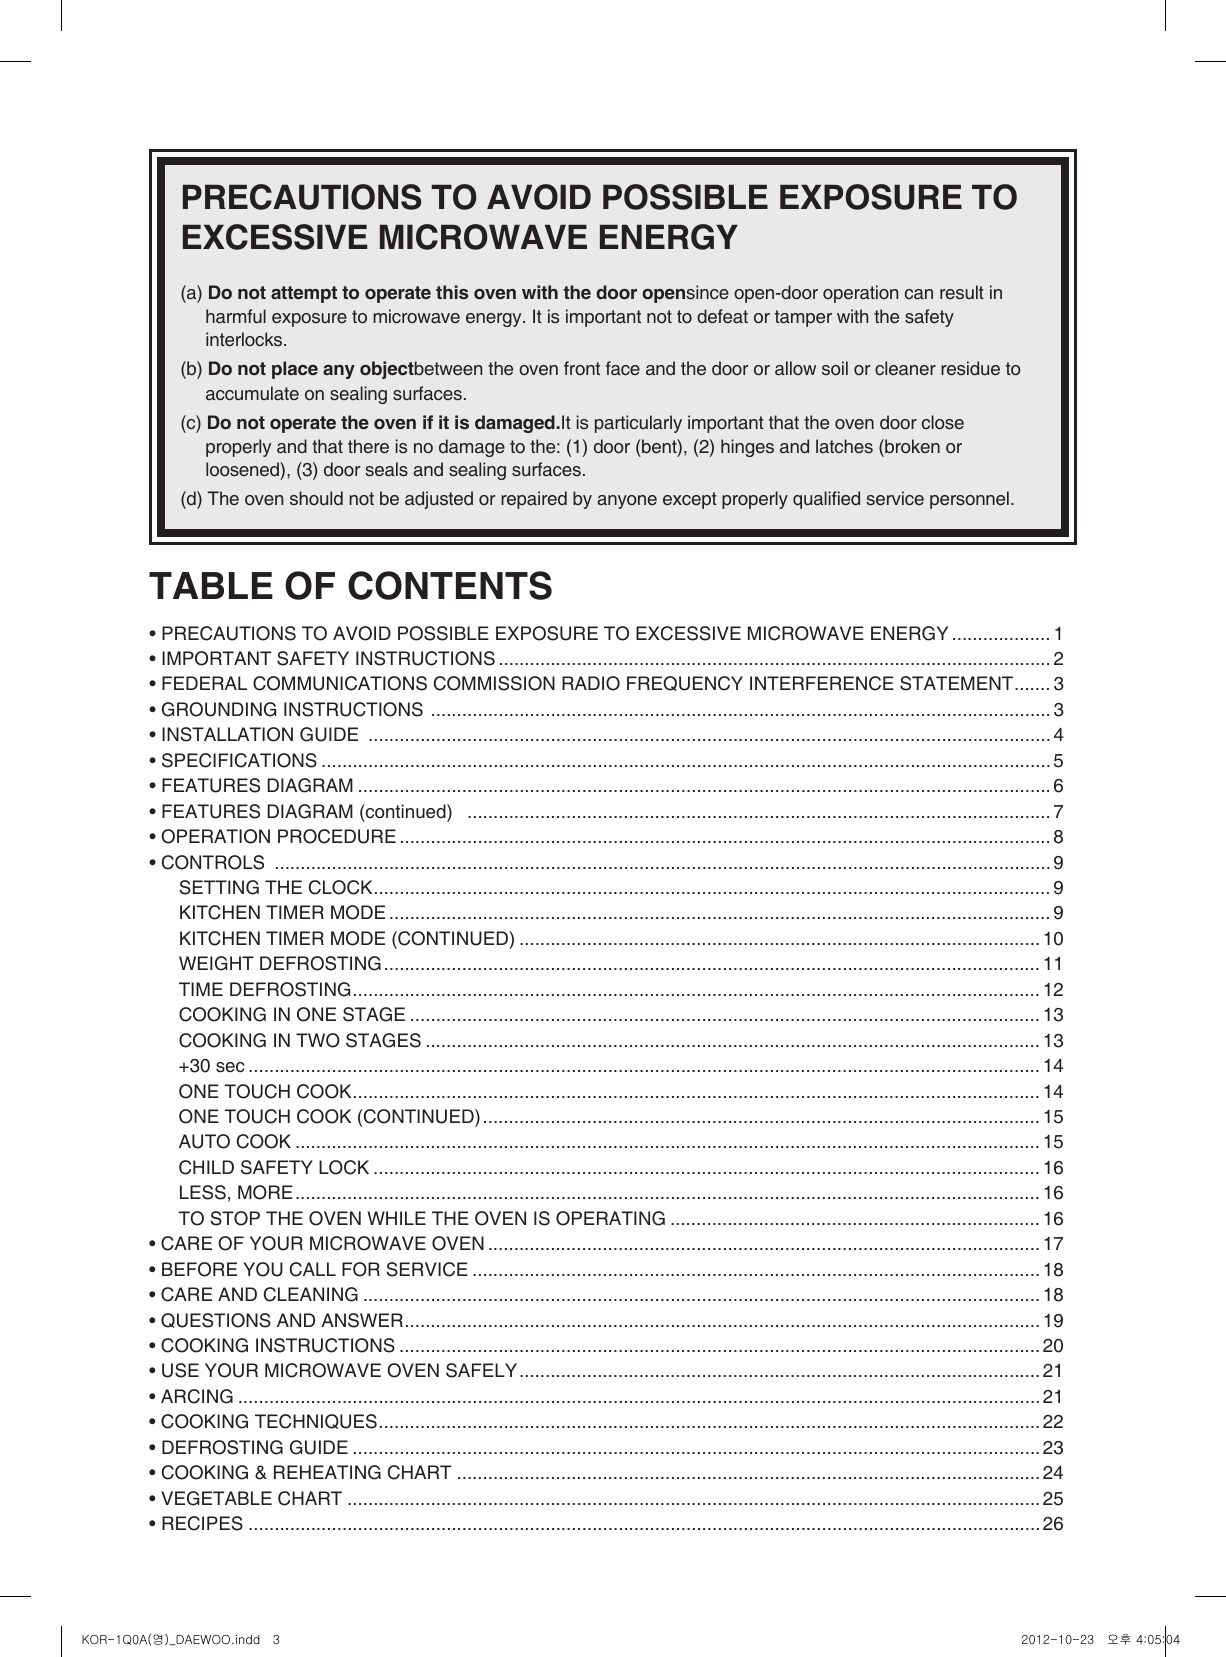 TABLE OF CONTENTS • PRECAUTIONS TO AVOID POSSIBLE EXPOSURE TO EXCESSIVE MICROWAVE ENERGY ................... 1• IMPORTANT SAFETY INSTRUCTIONS .......................................................................................................... 2• FEDERAL COMMUNICATIONS COMMISSION RADIO FREQUENCY INTERFERENCE STATEMENT ....... 3• GROUNDING INSTRUCTIONS  ....................................................................................................................... 3• INSTALLATION GUIDE  ................................................................................................................................... 4• SPECIFICATIONS ............................................................................................................................................ 5• FEATURES DIAGRAM ..................................................................................................................................... 6• FEATURES DIAGRAM (continued)   ................................................................................................................ 7• OPERATION PROCEDURE ............................................................................................................................. 8• CONTROLS  ..................................................................................................................................................... 9SETTING THE CLOCK .................................................................................................................................. 9KITCHEN TIMER MODE ............................................................................................................................... 9KITCHEN TIMER MODE (CONTINUED) .................................................................................................... 10WEIGHT DEFROSTING .............................................................................................................................. 11TIME DEFROSTING .................................................................................................................................... 12COOKING IN ONE STAGE ......................................................................................................................... 13COOKING IN TWO STAGES ...................................................................................................................... 13+30 sec ........................................................................................................................................................ 14ONE TOUCH COOK .................................................................................................................................... 14ONE TOUCH COOK (CONTINUED) ........................................................................................................... 15AUTO COOK ............................................................................................................................................... 15CHILD SAFETY LOCK ................................................................................................................................ 16LESS, MORE ............................................................................................................................................... 16TO STOP THE OVEN WHILE THE OVEN IS OPERATING ....................................................................... 16• CARE OF YOUR MICROWAVE OVEN .......................................................................................................... 17• BEFORE YOU CALL FOR SERVICE ............................................................................................................. 18• CARE AND CLEANING .................................................................................................................................. 18• QUESTIONS AND ANSWER .......................................................................................................................... 19• COOKING INSTRUCTIONS ........................................................................................................................... 20• USE YOUR MICROWAVE OVEN SAFELY .................................................................................................... 21• ARCING .......................................................................................................................................................... 21• COOKING TECHNIQUES ............................................................................................................................... 22• DEFROSTING GUIDE .................................................................................................................................... 23• COOKING &amp; REHEATING CHART ................................................................................................................ 24• VEGETABLE CHART .....................................................................................................................................25• RECIPES ........................................................................................................................................................26PRECAUTIONS TO AVOID POSSIBLE EXPOSURE TO EXCESSIVE MICROWAVE ENERGY (a) Do not attempt to operate this oven with the door opensince open-door operation can result in harmful exposure to microwave energy. It is important not to defeat or tamper with the safety interlocks. (b) Do not place any objectbetween the oven front face and the door or allow soil or cleaner residue to accumulate on sealing surfaces. (c) Do not operate the oven if it is damaged.It is particularly important that the oven door close properly and that there is no damage to the: (1) door (bent), (2) hinges and latches (broken or loosened), (3) door seals and sealing surfaces. (d) The oven should not be adjusted or repaired by anyone except properly qualied service personnel.  KOR-1Q0A(영)_DAEWOO.indd   3 2012-10-23   오후 4:05:04